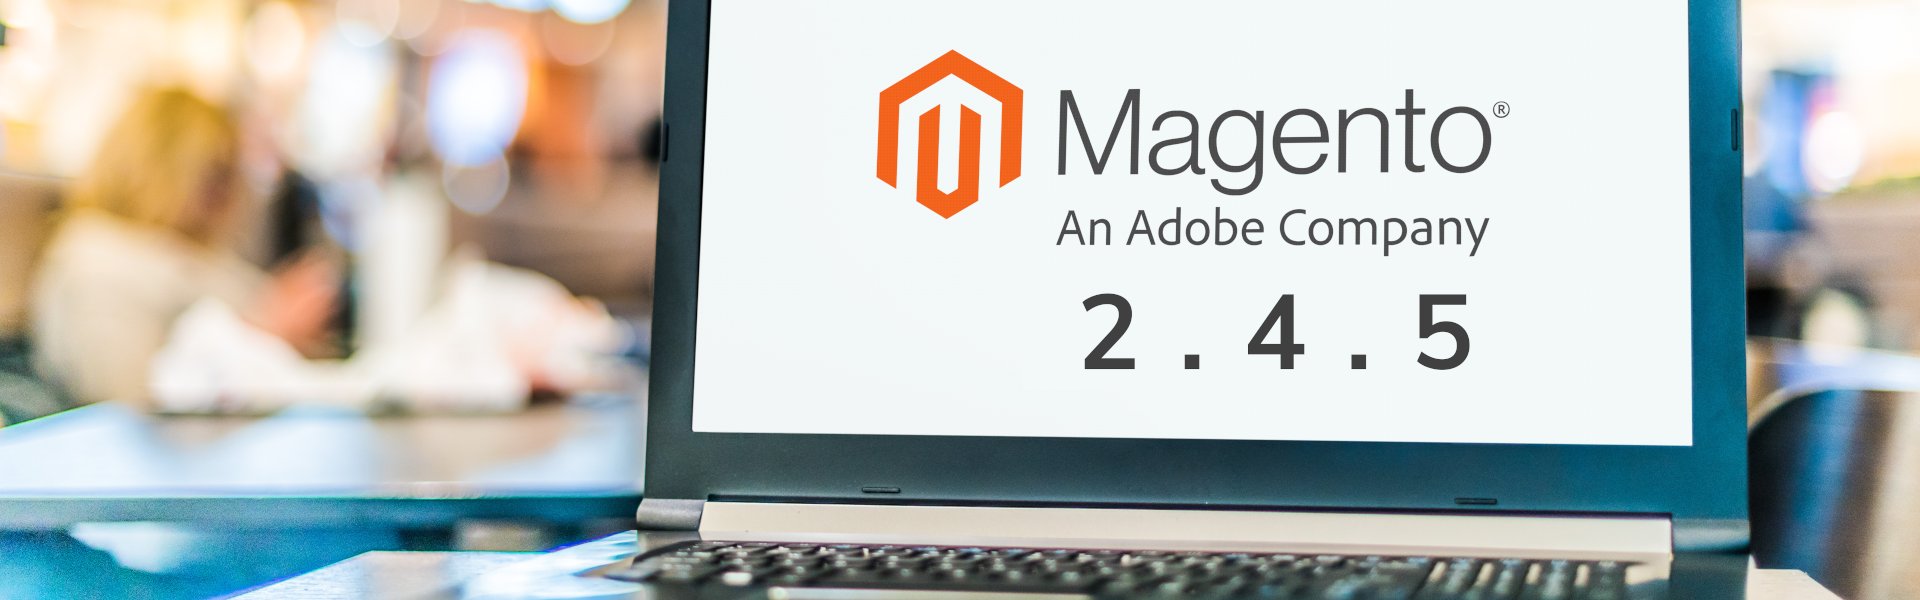 What's in Magento 2.4.5?